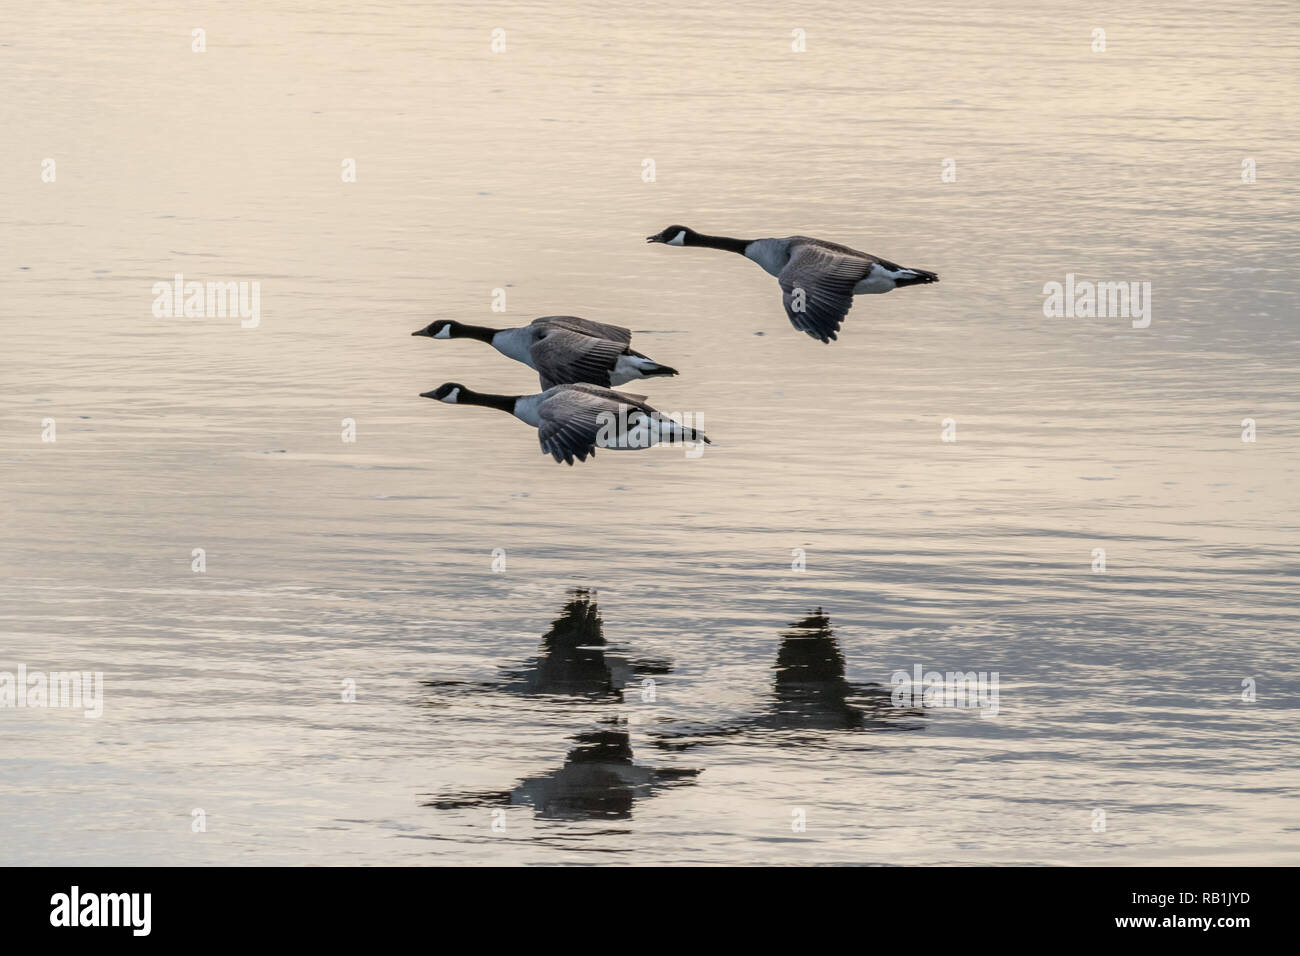 Three Candian Geese flying along the River Mersey in January 2017 during Winter casting a reflection into the water below. Stock Photo